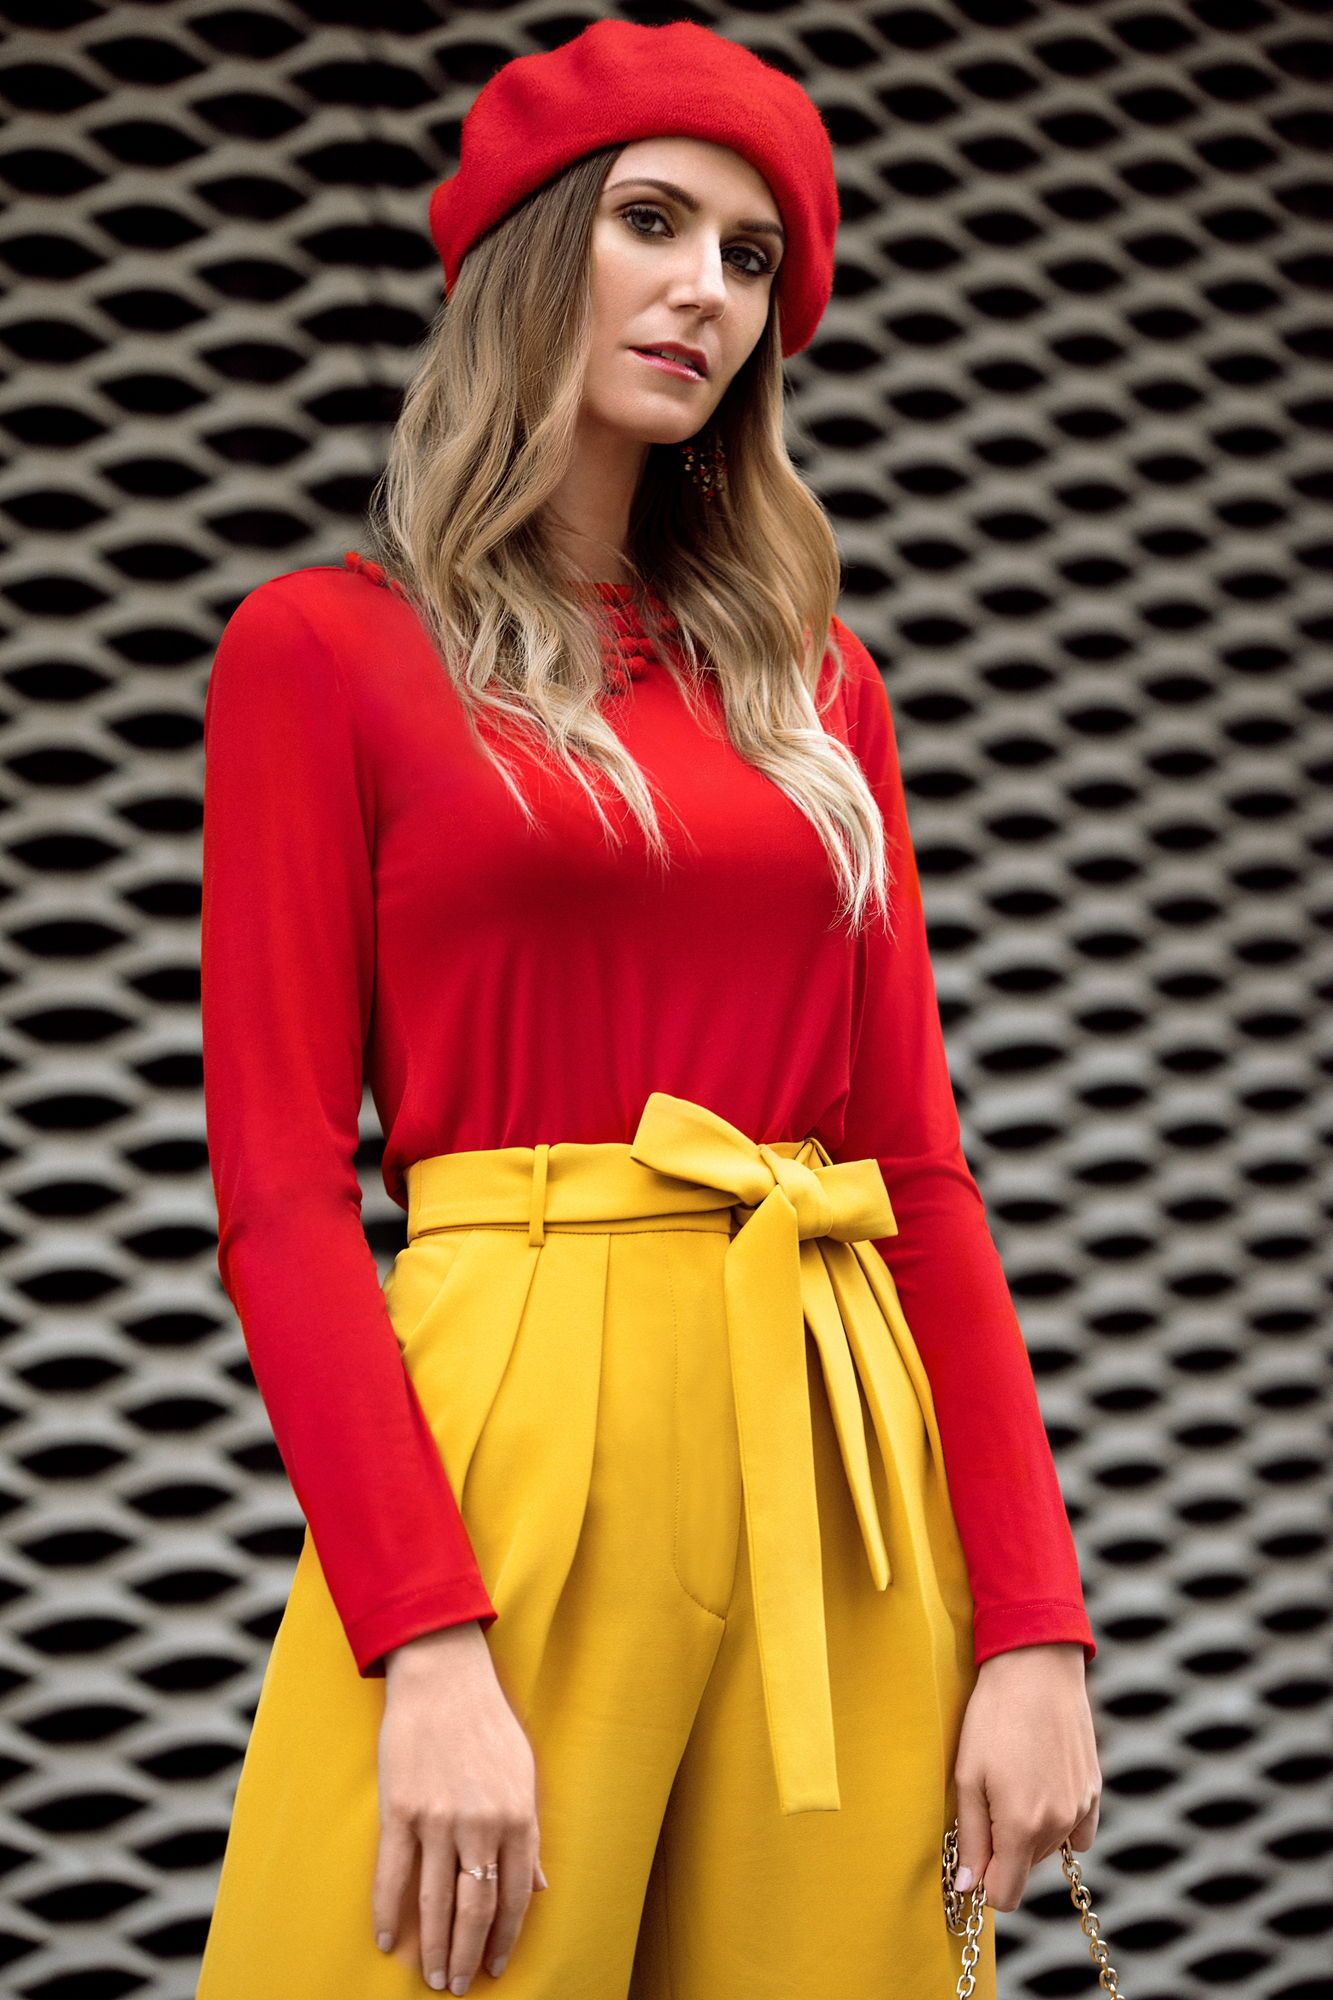 Red Blouse Outfit Ideas for
  Women